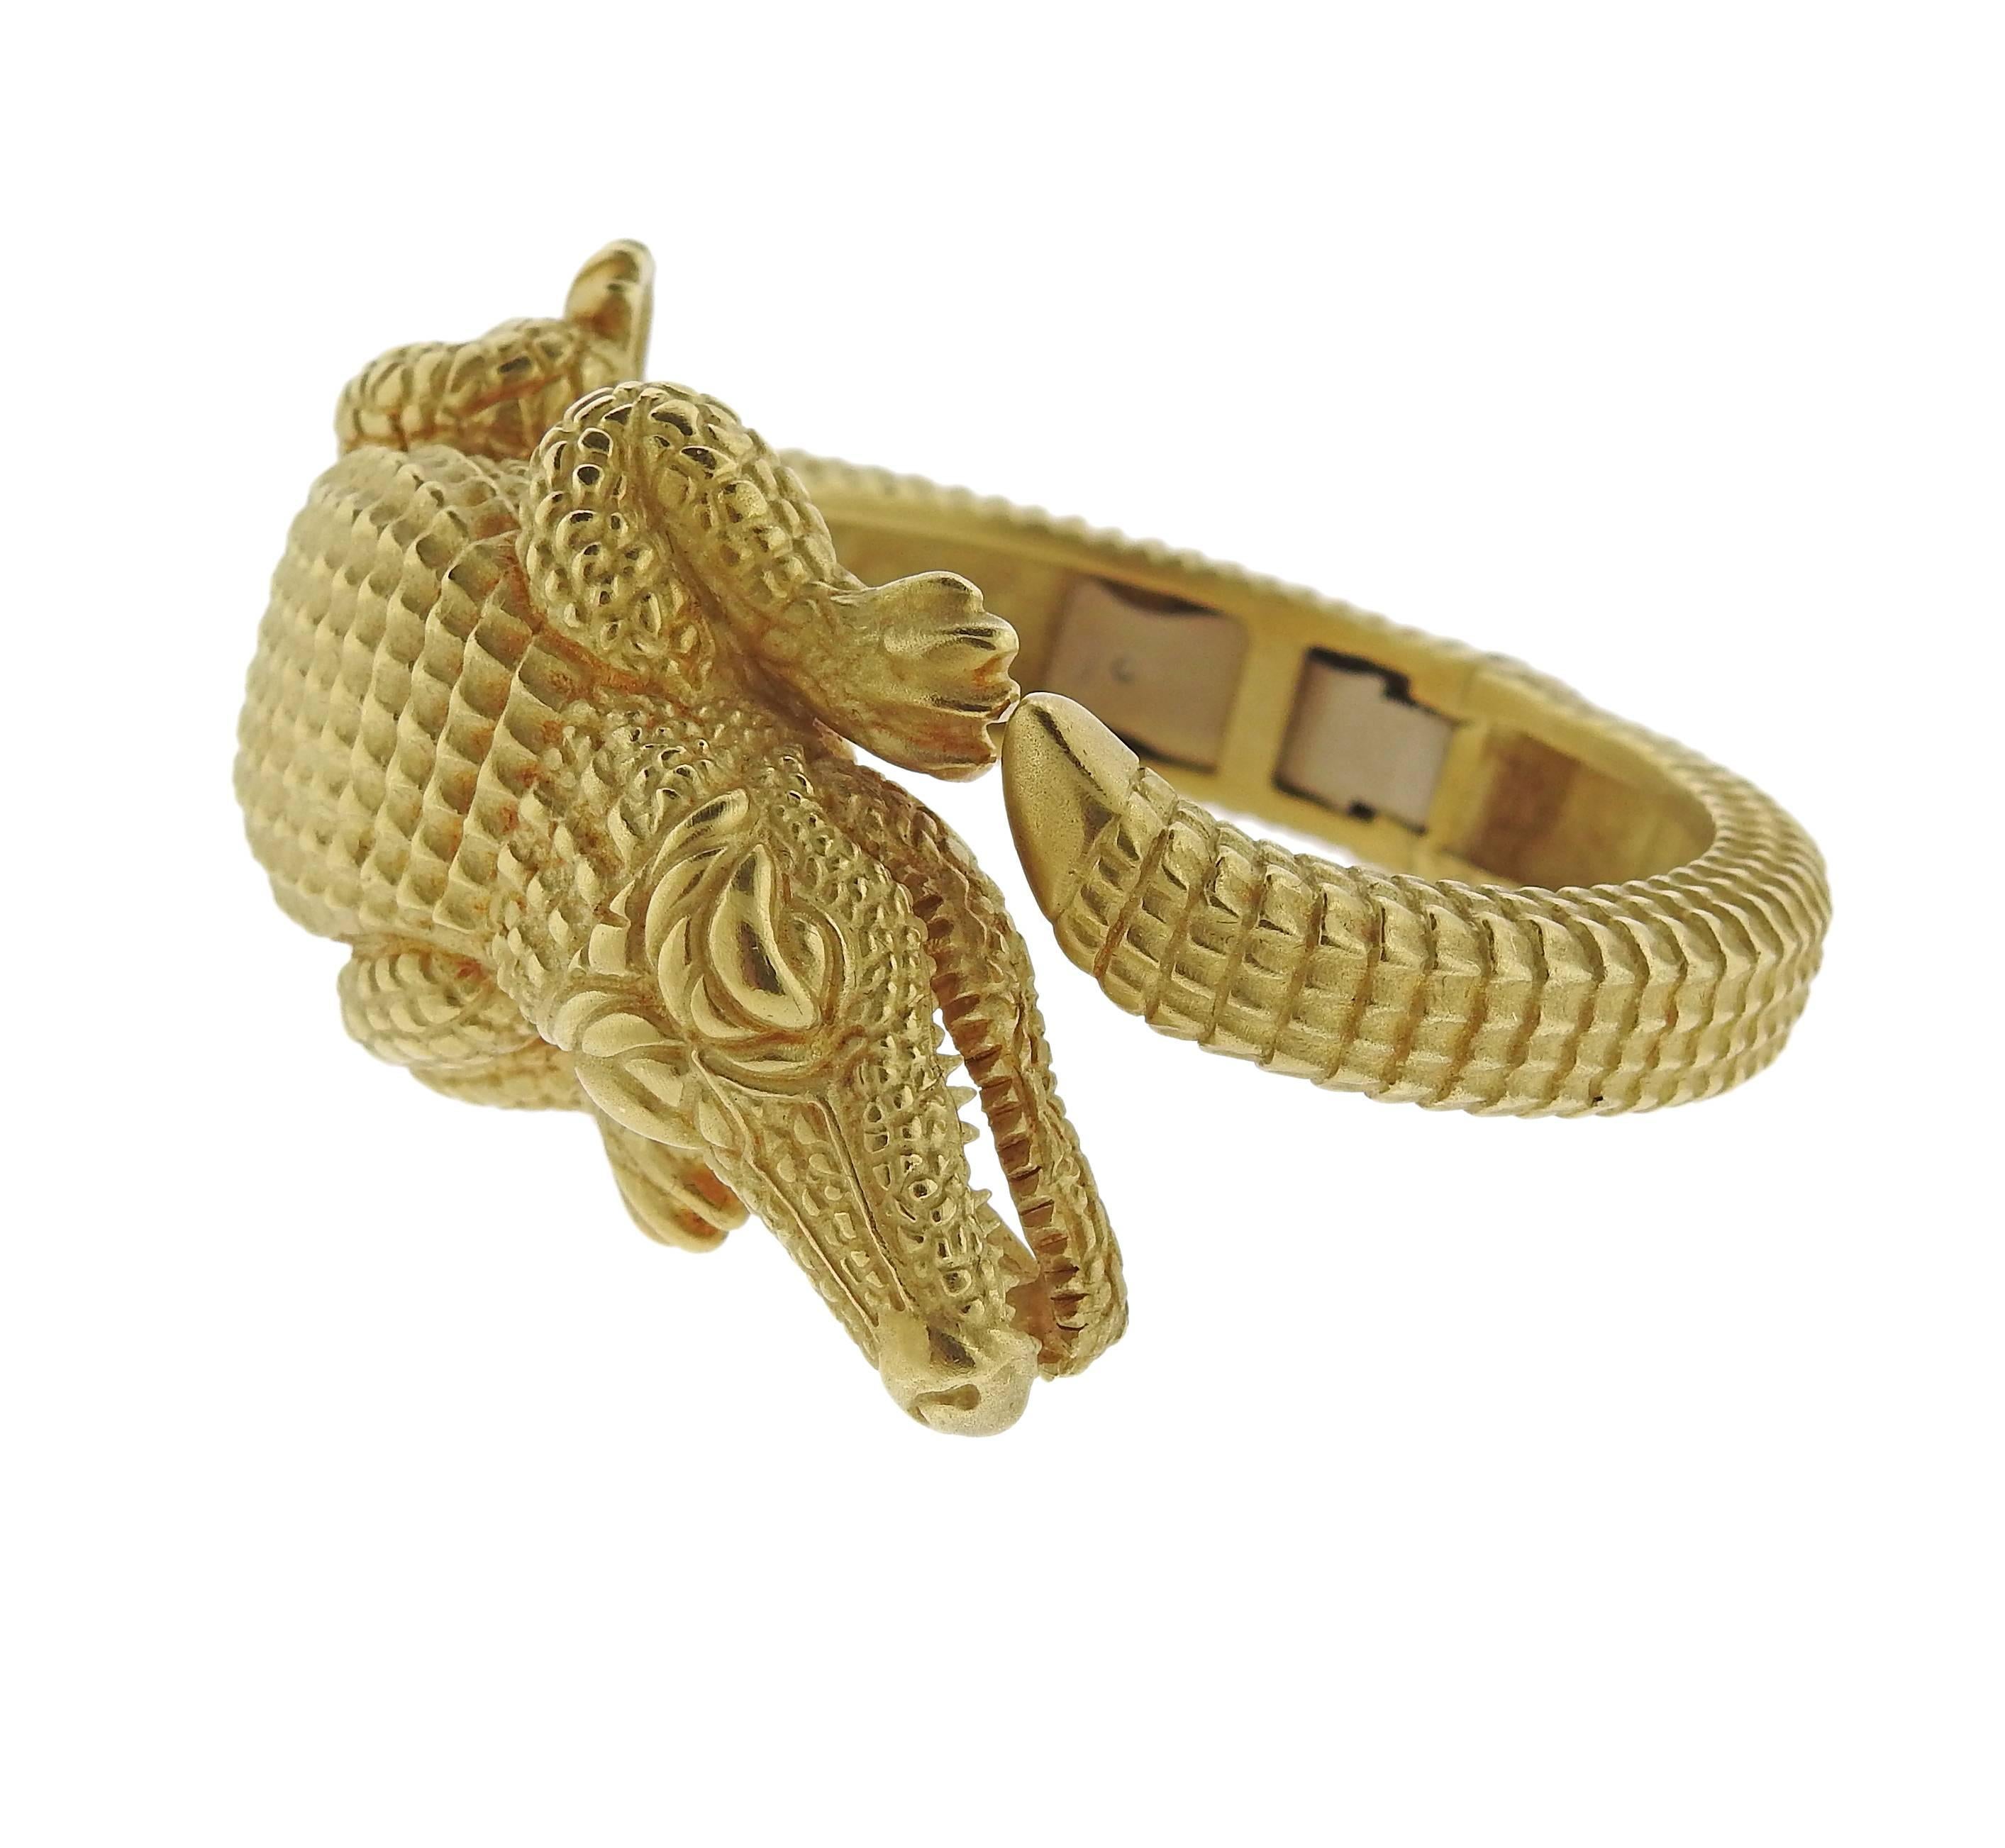 Iconic alligator bracelet, crafted by Kieselstein Cord in 18k yellow gold. Bracelet will fit approx. 7" wrist and is 35mm wide, weighs 164.5 grams. Marked: 750, B.Kieselstein-Cord, 18k, Maker's mark.